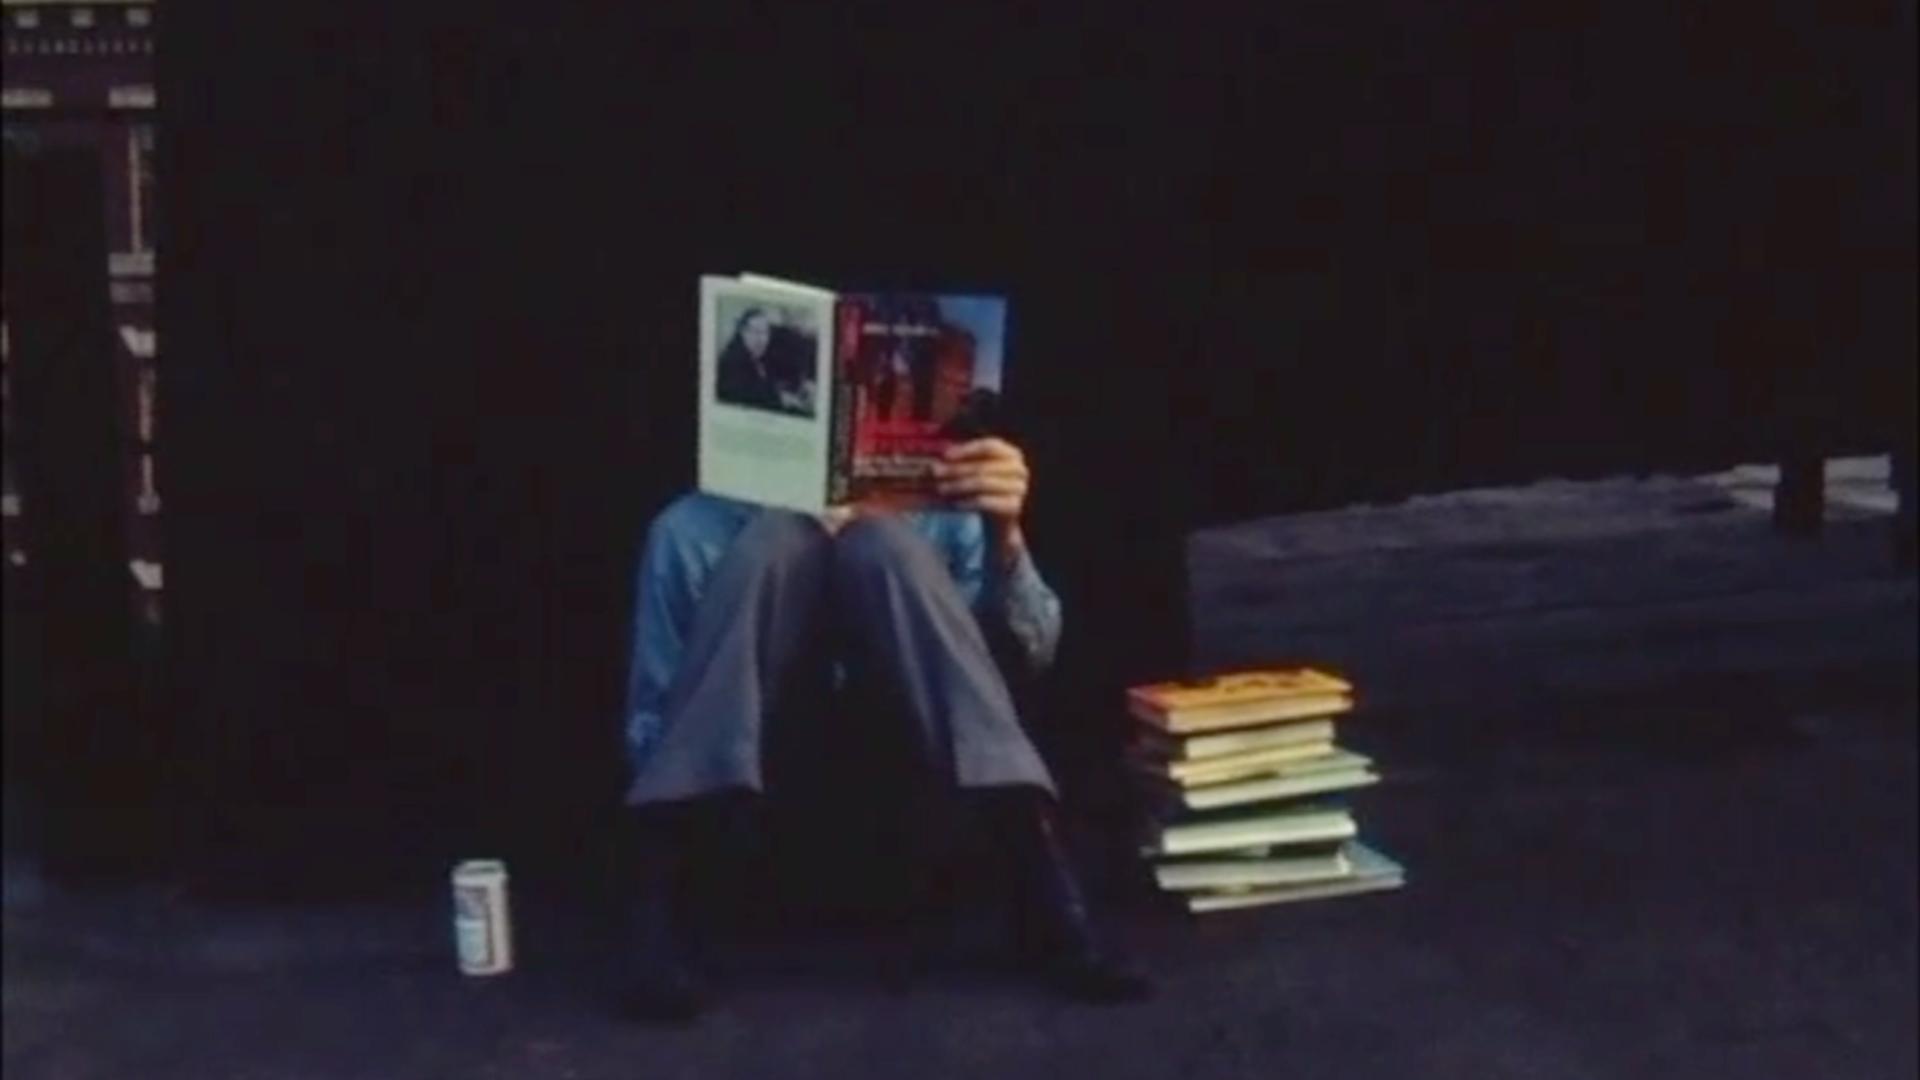 man sitting on the ground reading a book with a pile of books next to him